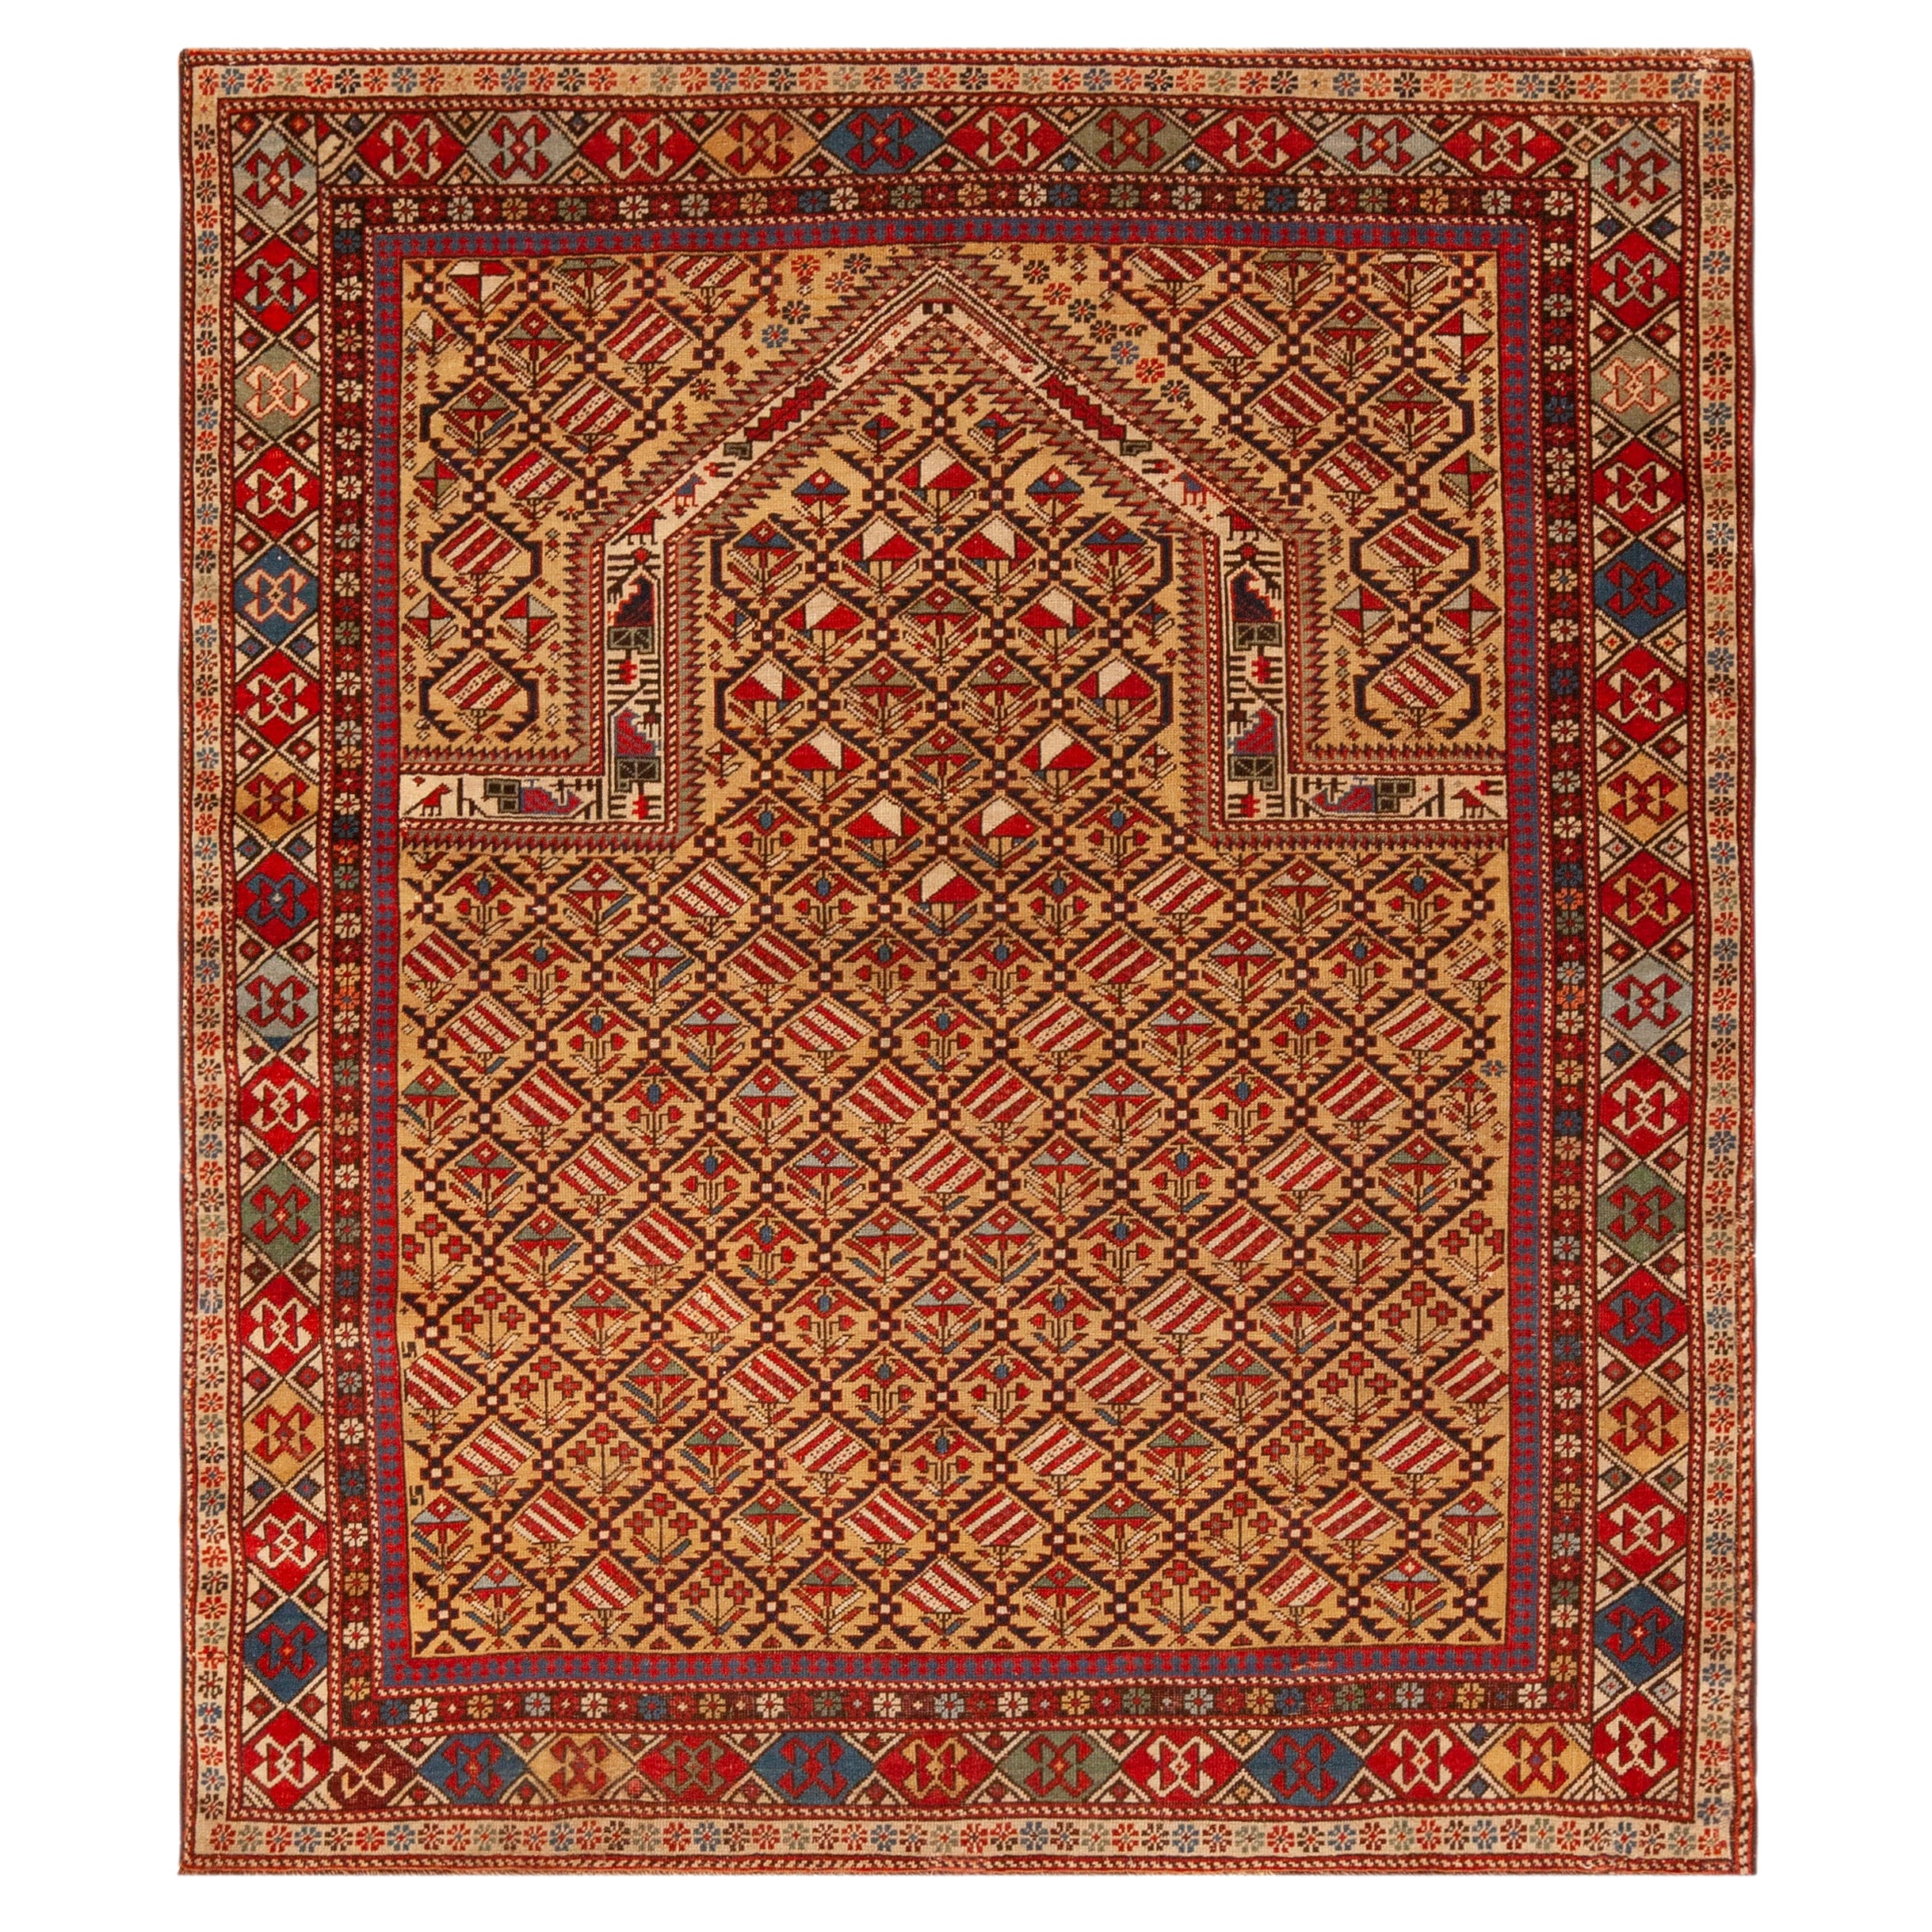 Nazmiyal Collection Antique Caucasian Dagestan Prayer Rug. Size: 5 ft x 4 ft 5in